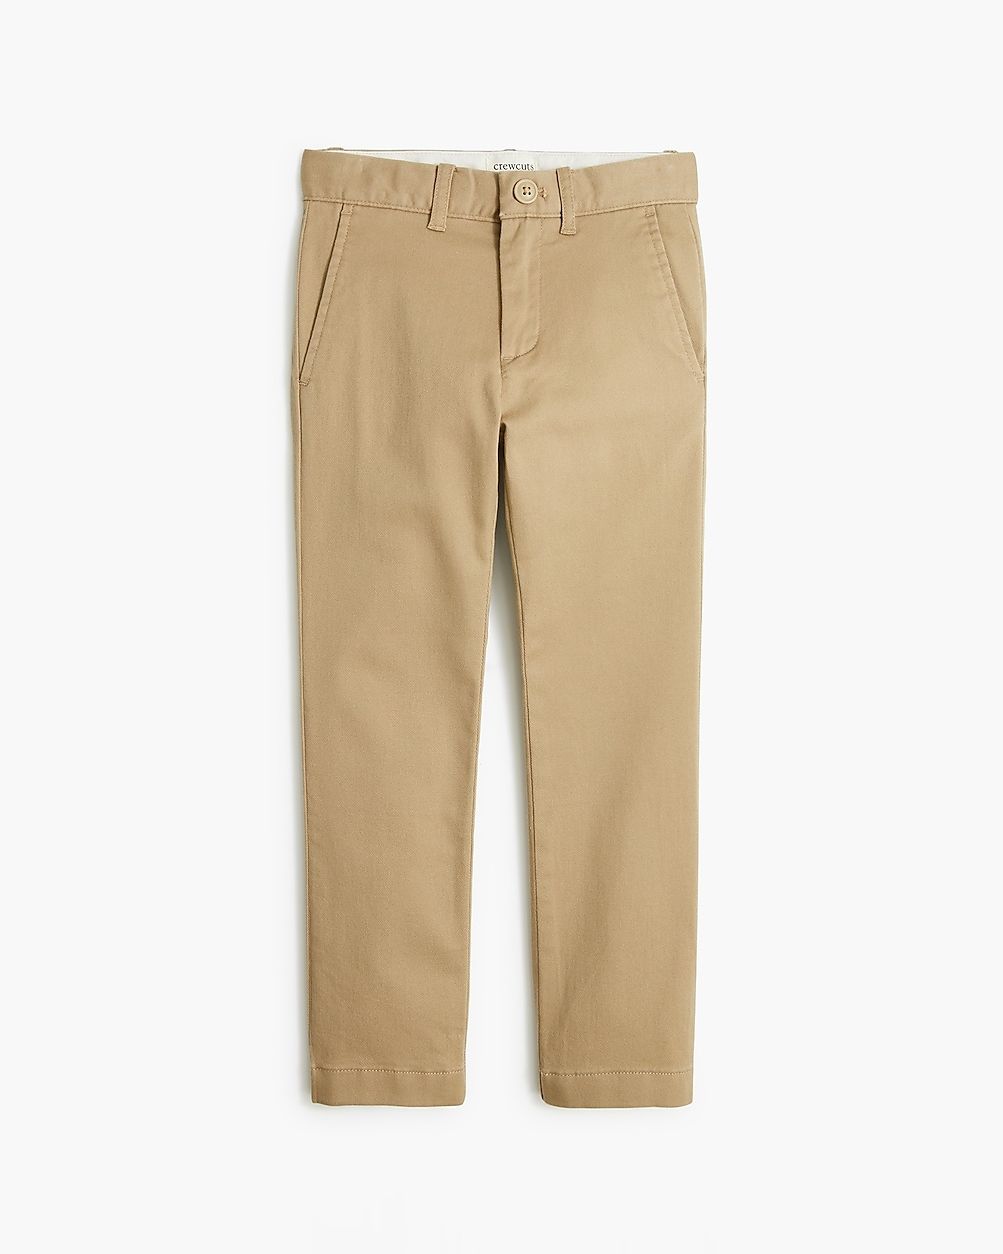 Boys' skinny-fit pant in flex chino | J.Crew Factory